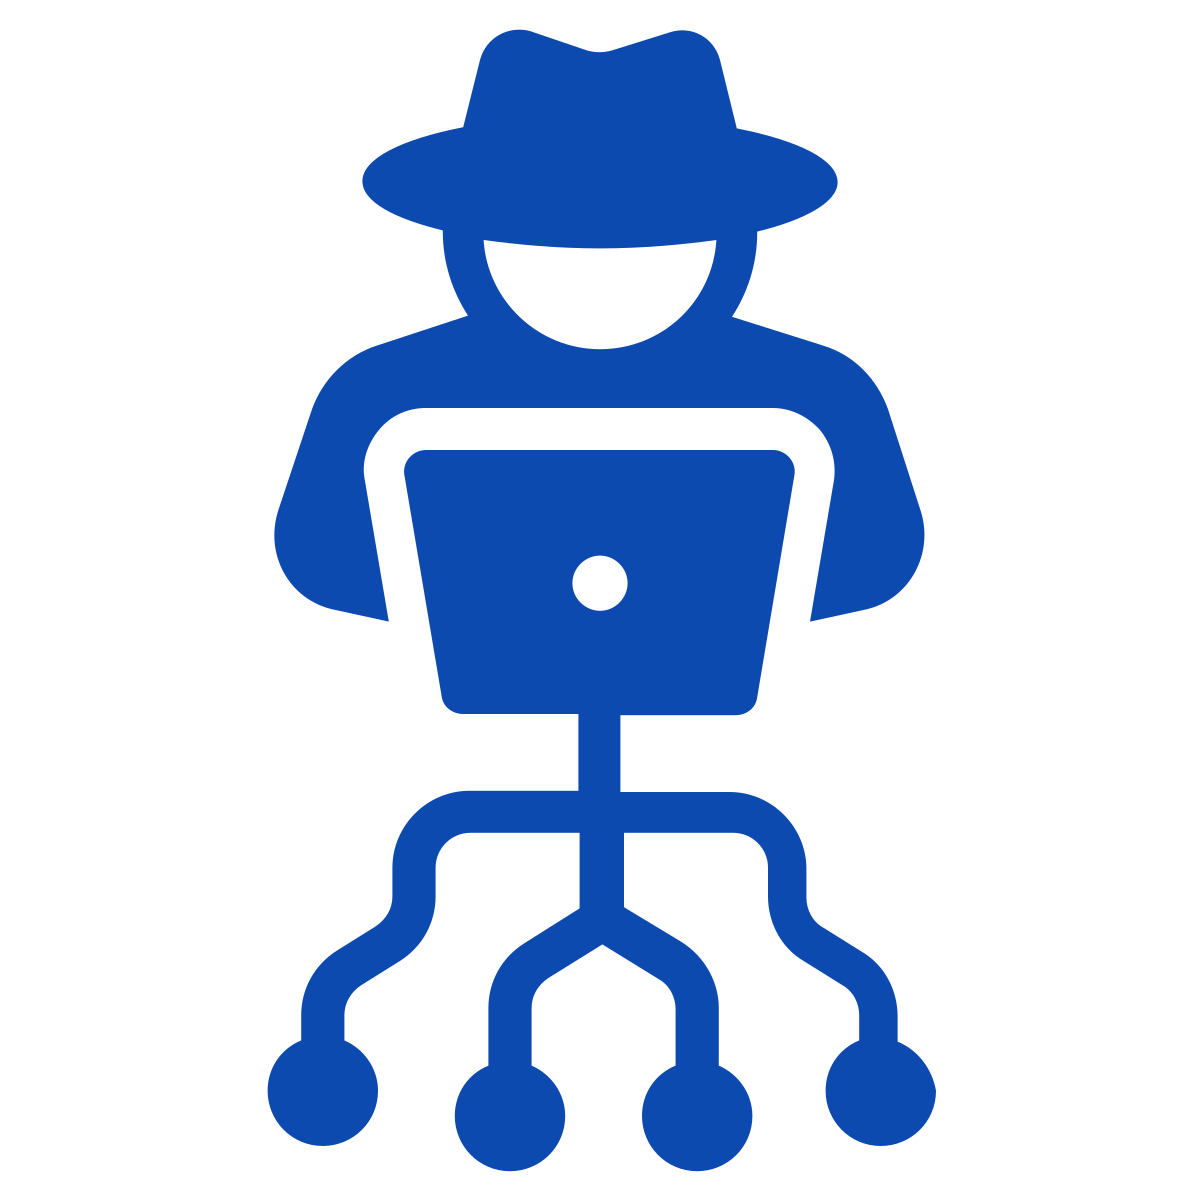 Person with hat sitting at a laptop computer with networking connections coming out of it